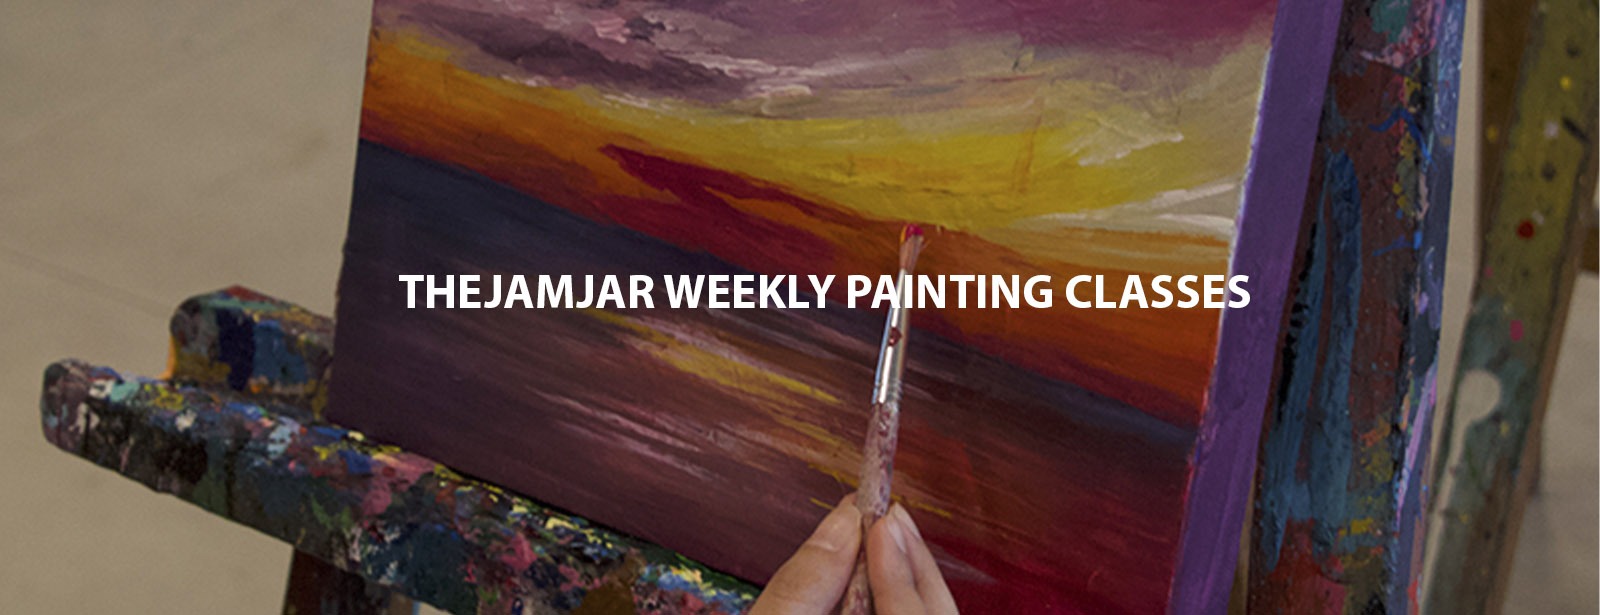 Painting Classes at the JamJar Community Arts Space - Coming Soon in UAE